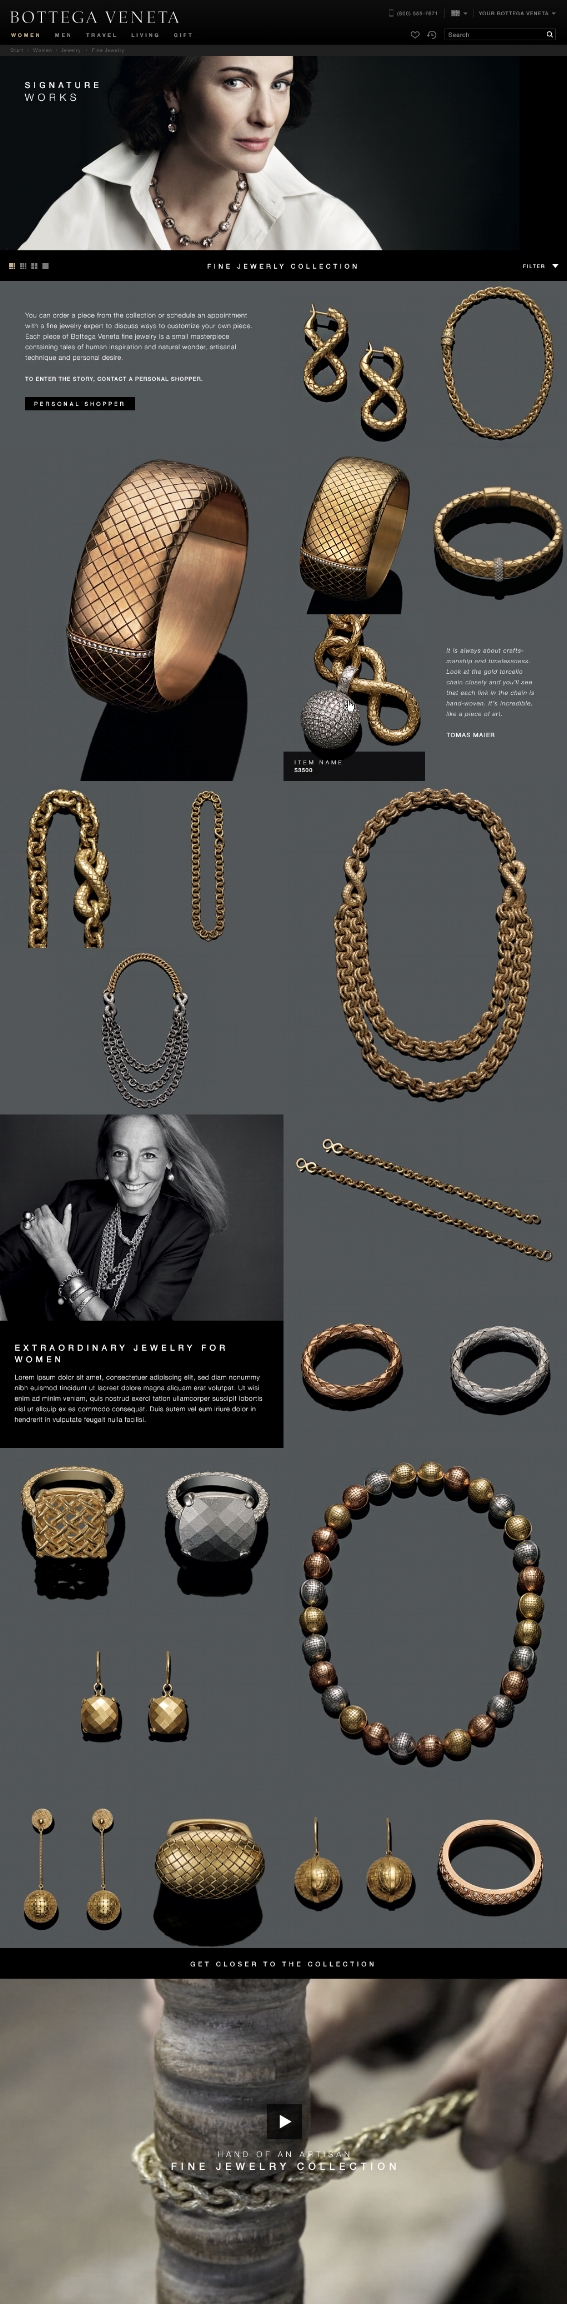 4grid_FineJewelry_Editorial Grid_w_images.jpg